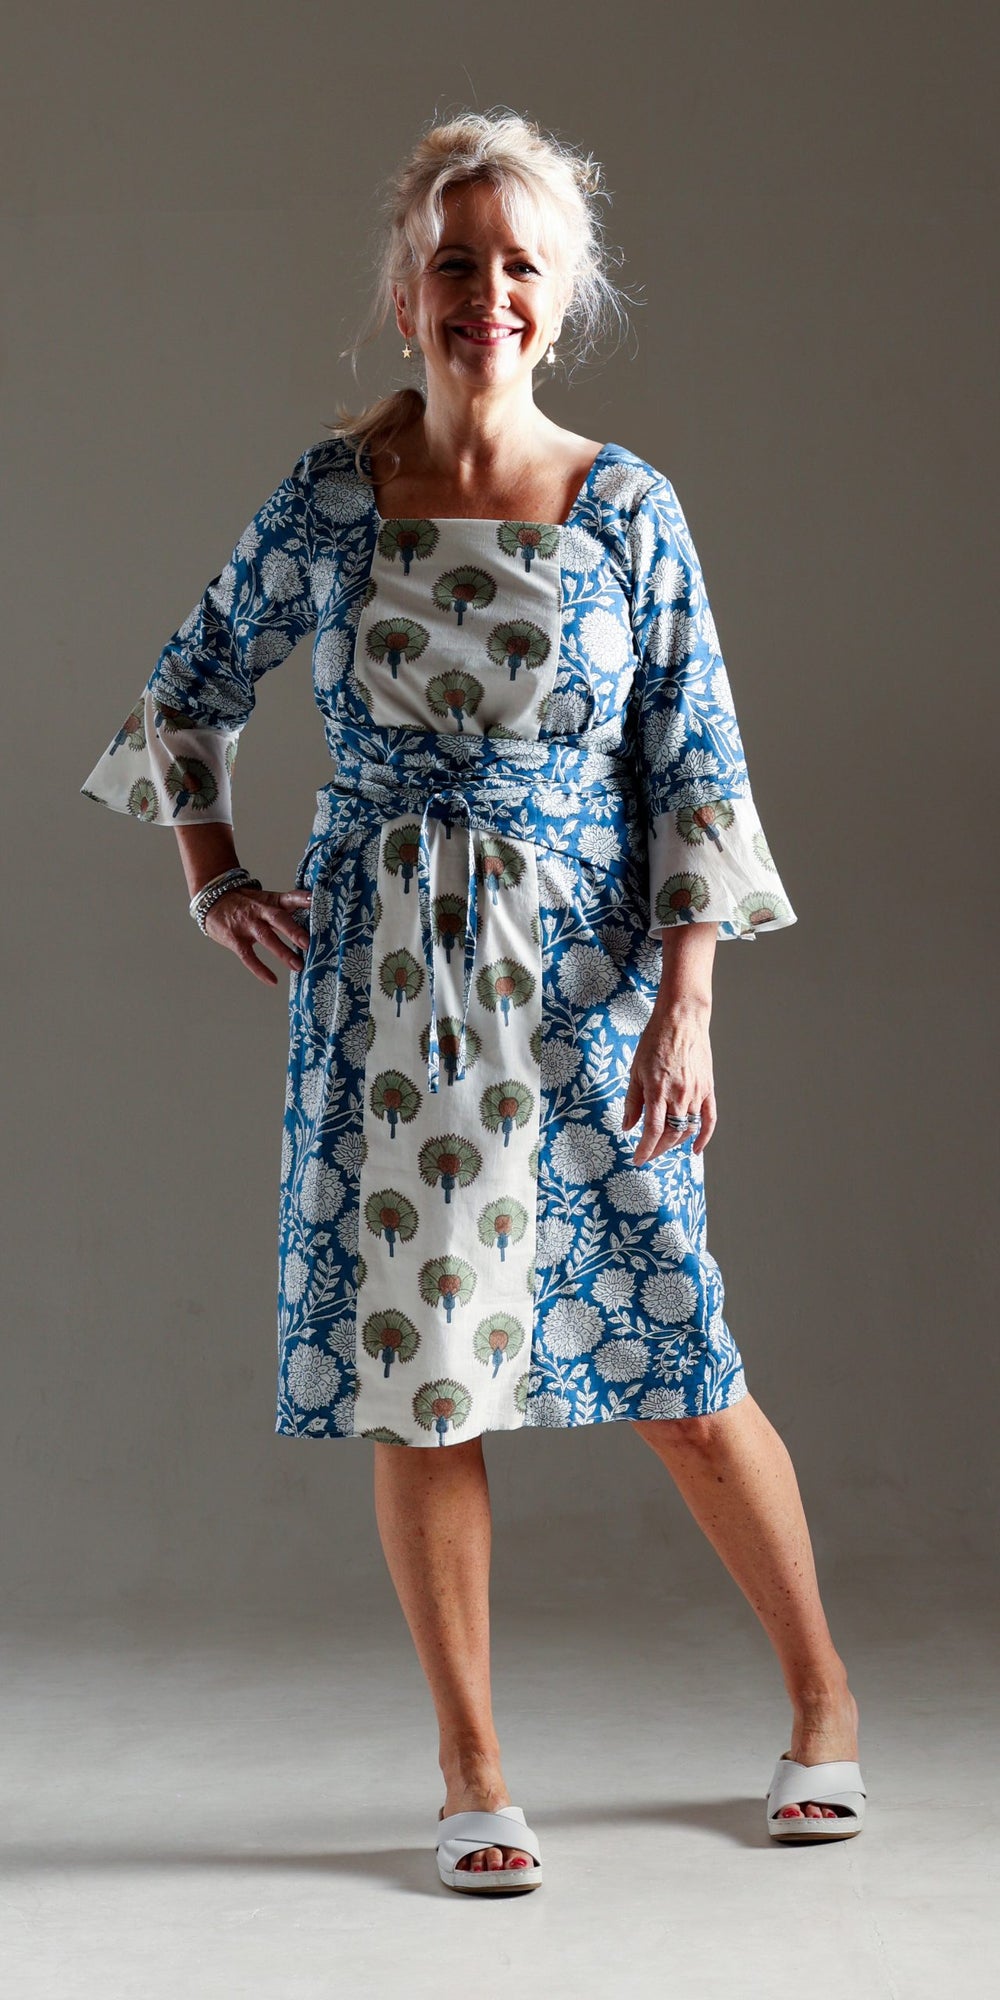 Woman wearing the Tuk Tuk Dress sewing pattern from Sew Different on The Fold Line. A faux wrap dress pattern made in lightweight cotton, viscose, rayon, and lightweight linen fabrics, featuring a square-neck, side wings extending into narrow waist ties, 